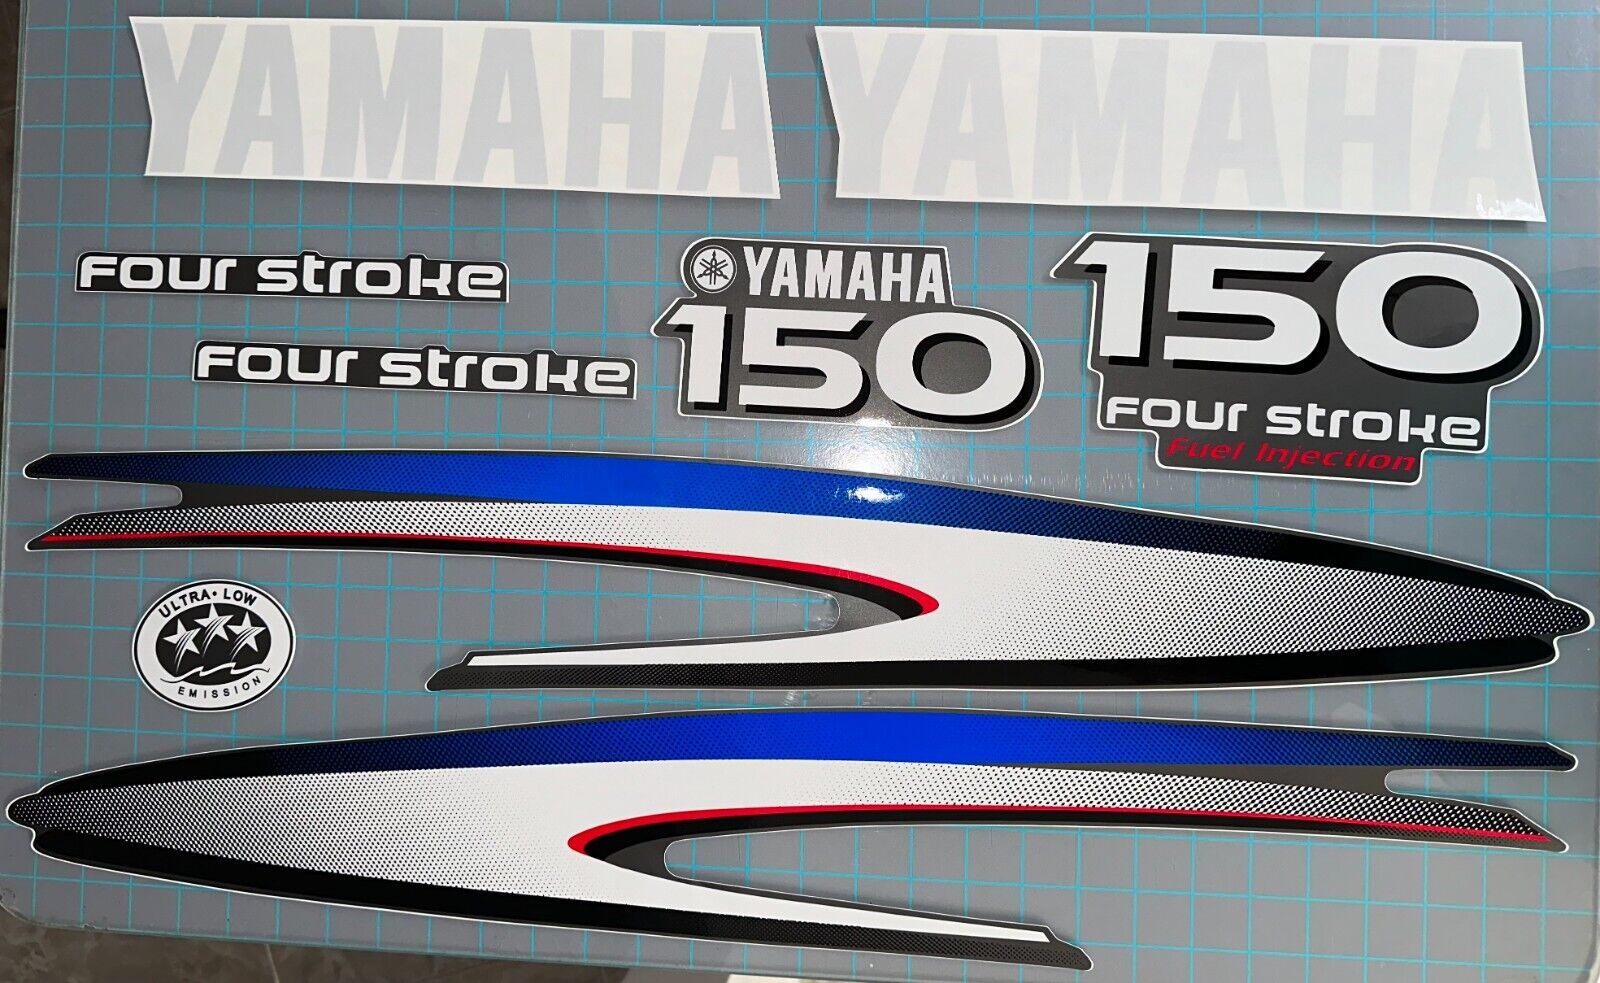 Yamaha 150hp Four Stroke Outboard Set Decal / Stickers